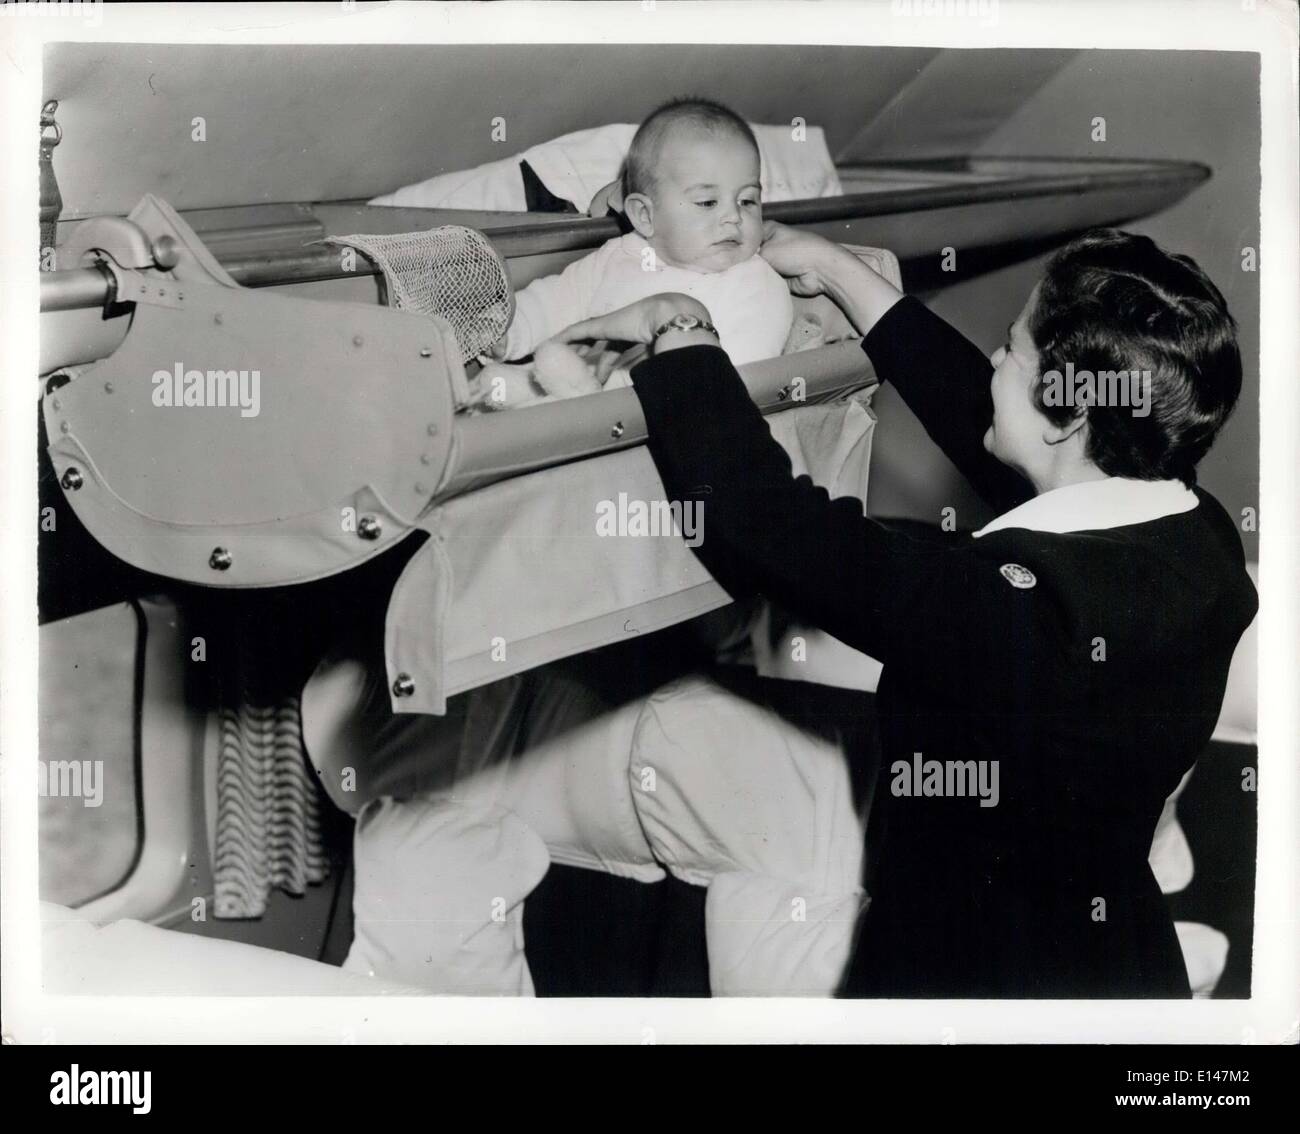 Apr. 17, 2012 - Babies Now Really Sleep in the Clouds: Baby- and mother - can travel in comfort with this ''Sky-Cot'' designed by British Overseas Airways Corporation. It clips onto the overhead lugagge rack of the plane. It is claimed strongly built, and that even the most restless baby cannot fall out. Photo shows Stewardess tucks baby in the ''Sky-Cot'' made by Whitgam Bennett LTD., 43-45 Thames St. Kingston - on Thames, Surrey, England. Stock Photo